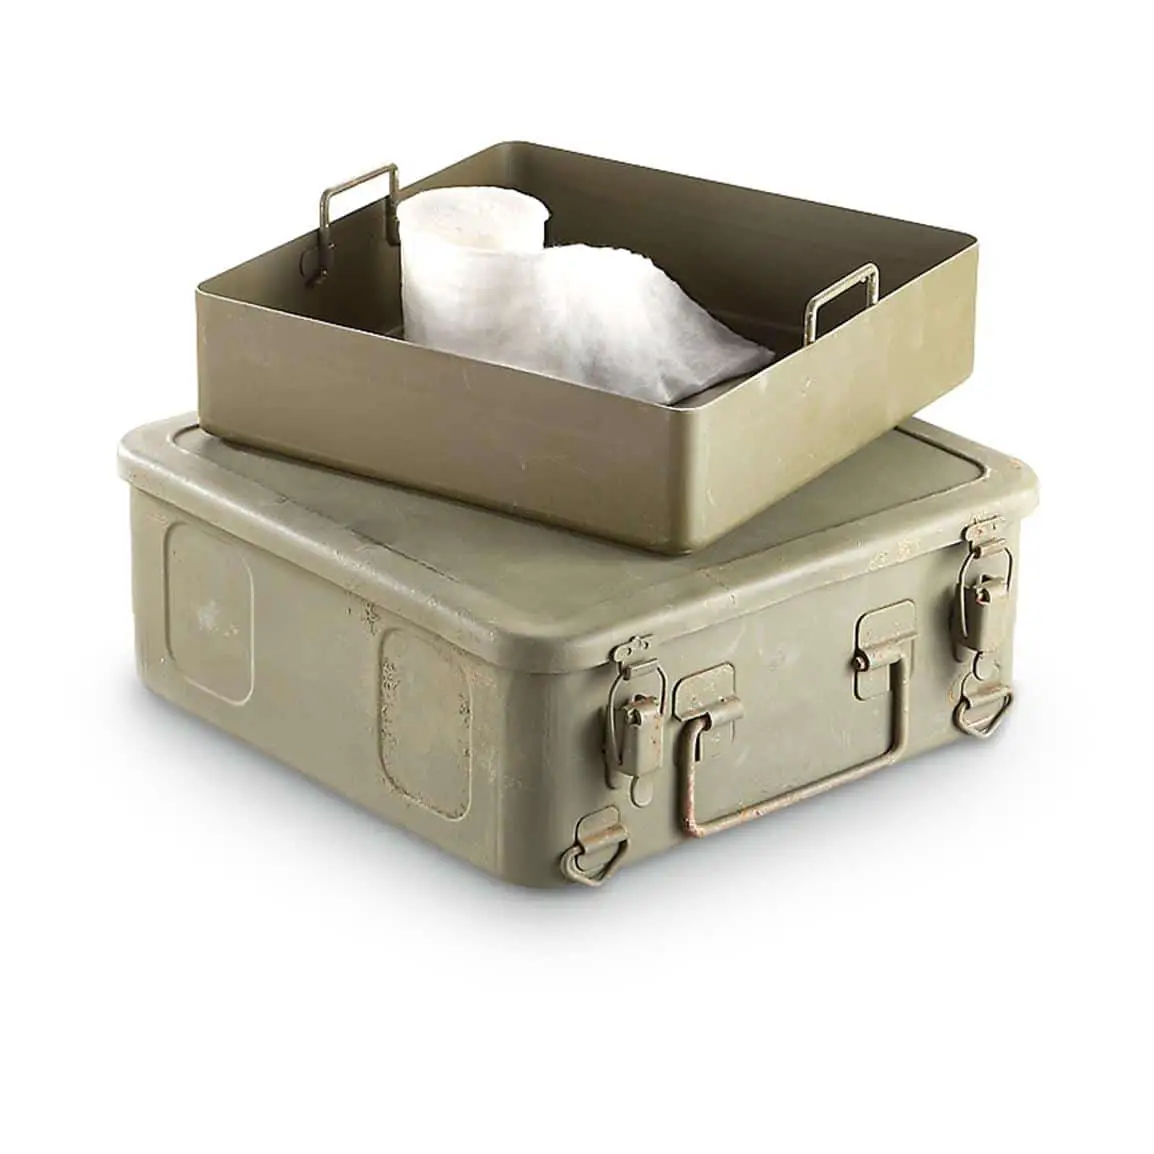 New French Military Surplus Medical Box, Olive Drab